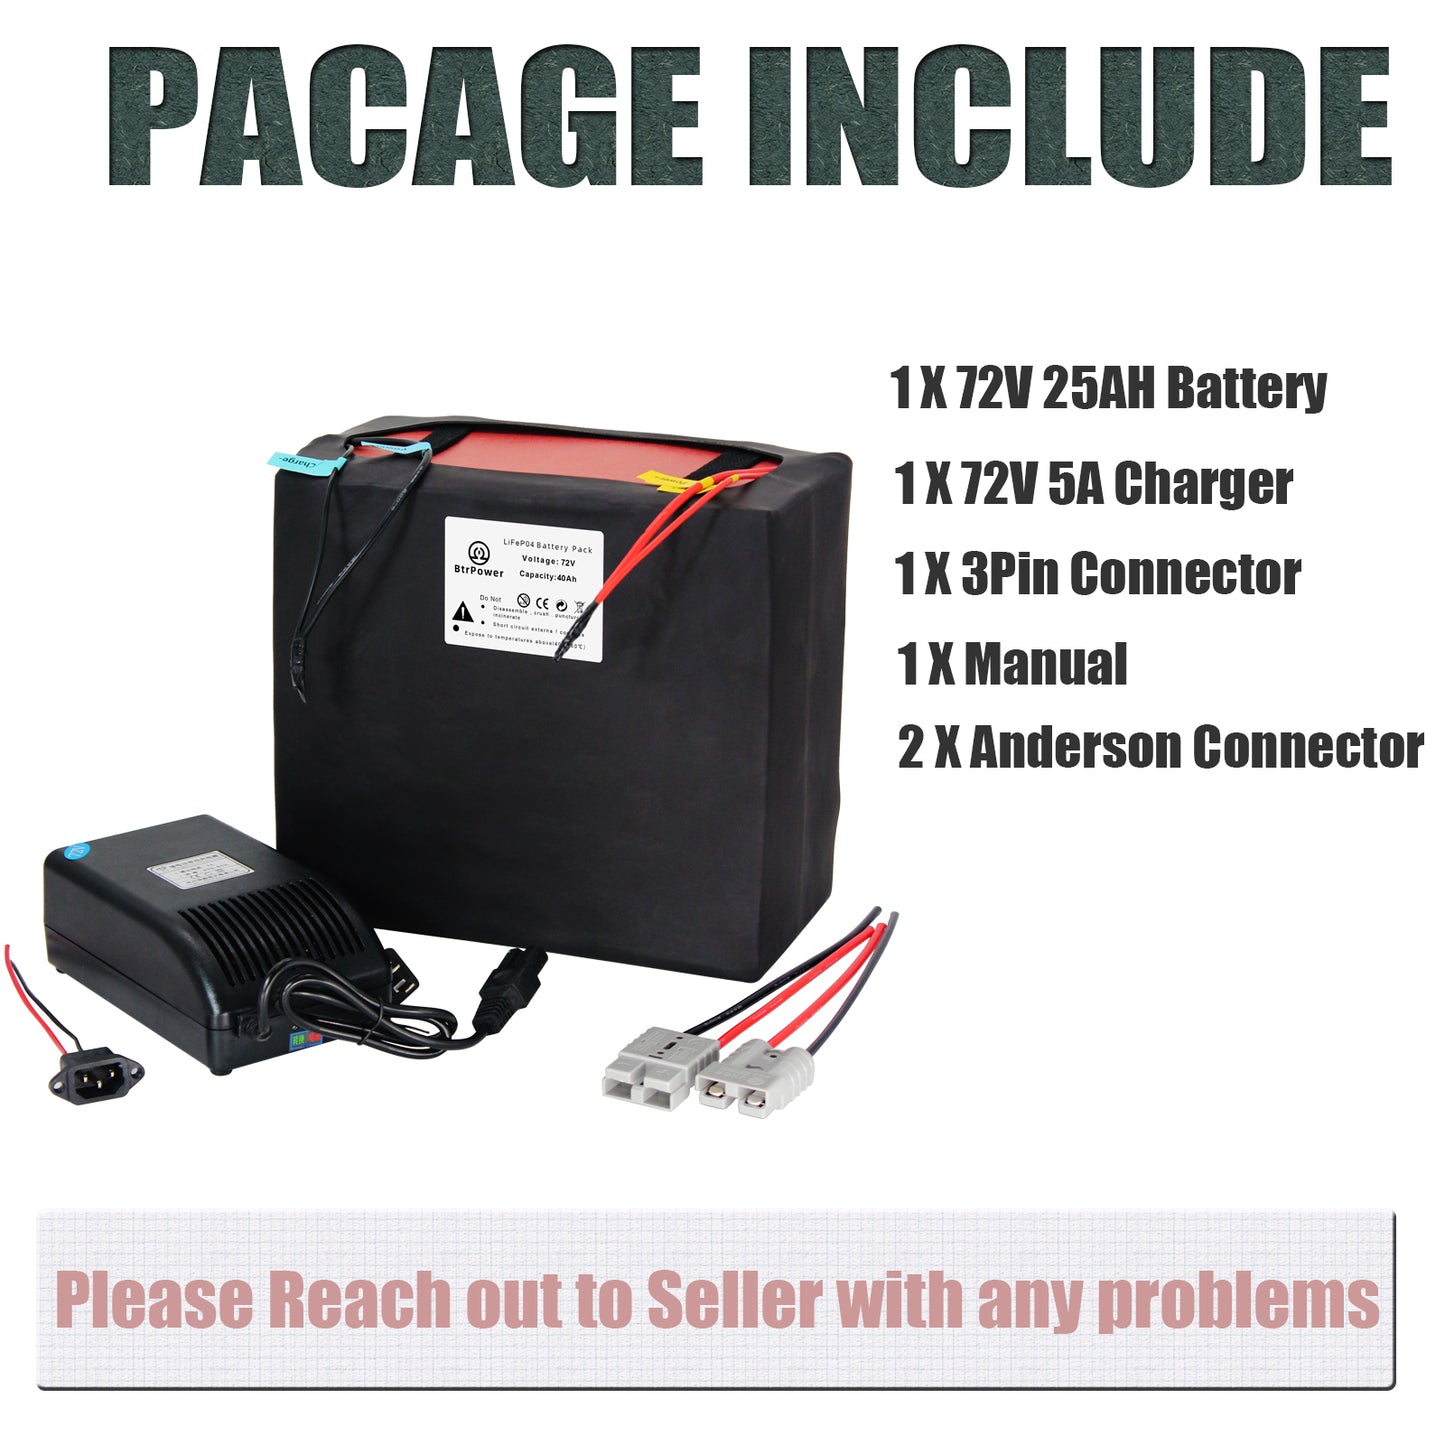 BtrPower Ebike Battery 72V 40AH LiFePO4 Battery Pack with 5A Charger 80A BMS